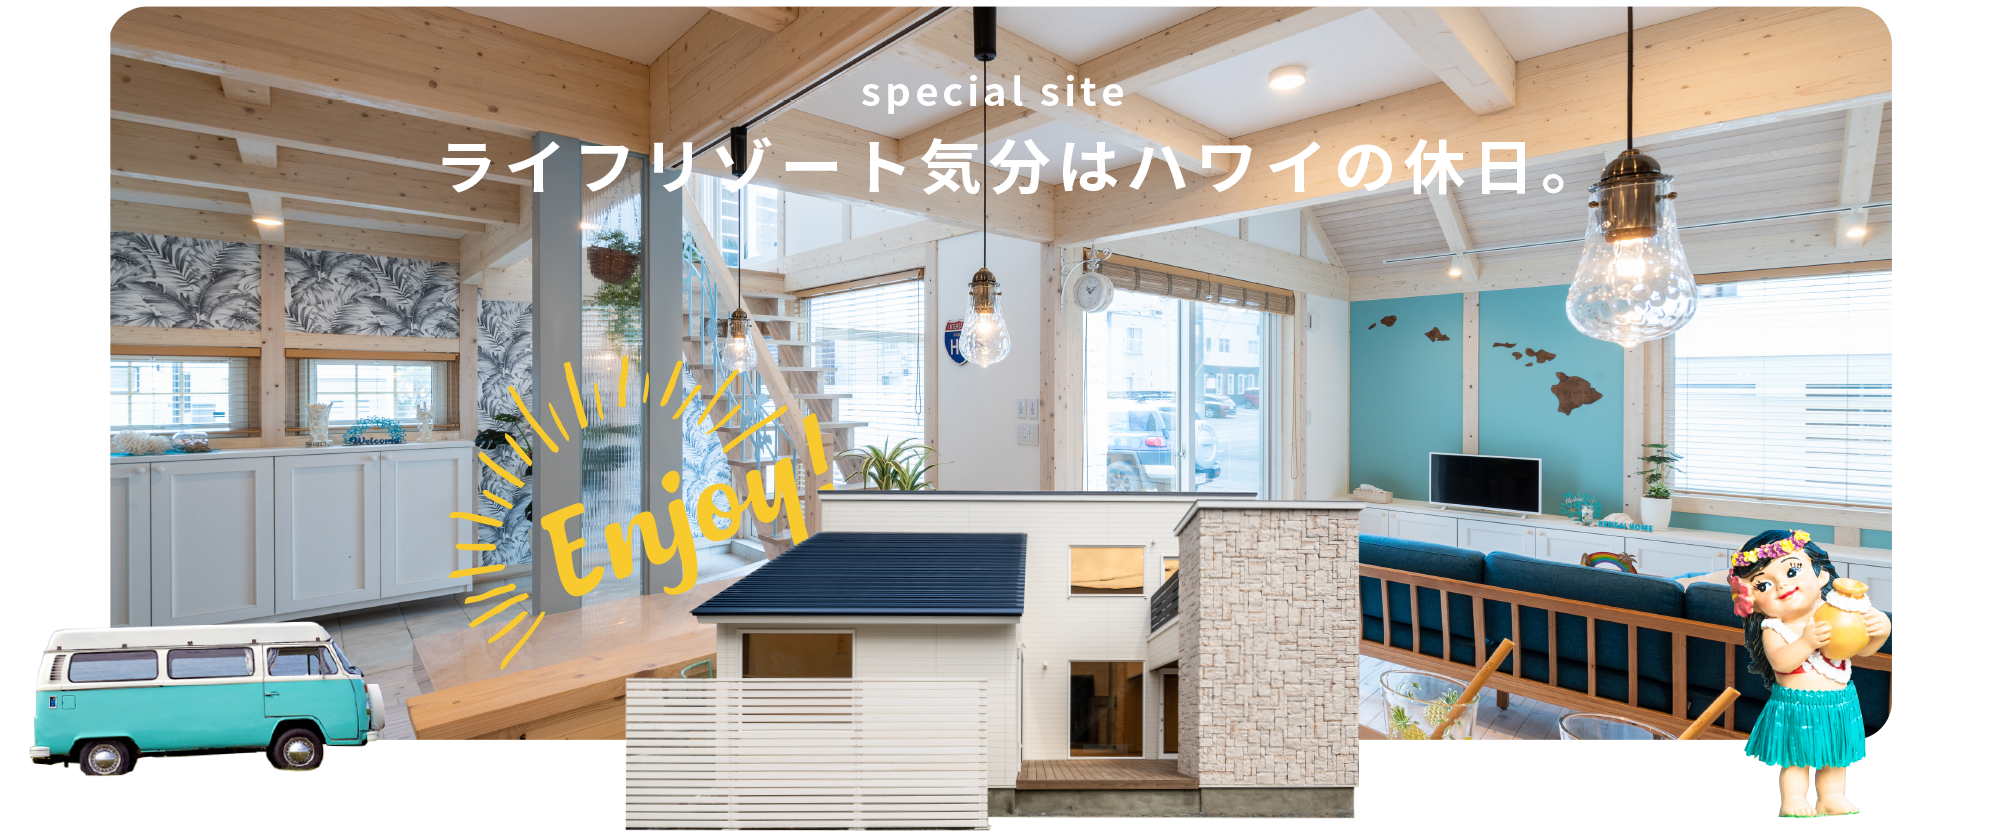 special site - ライフリゾート気分はハワイの休日。